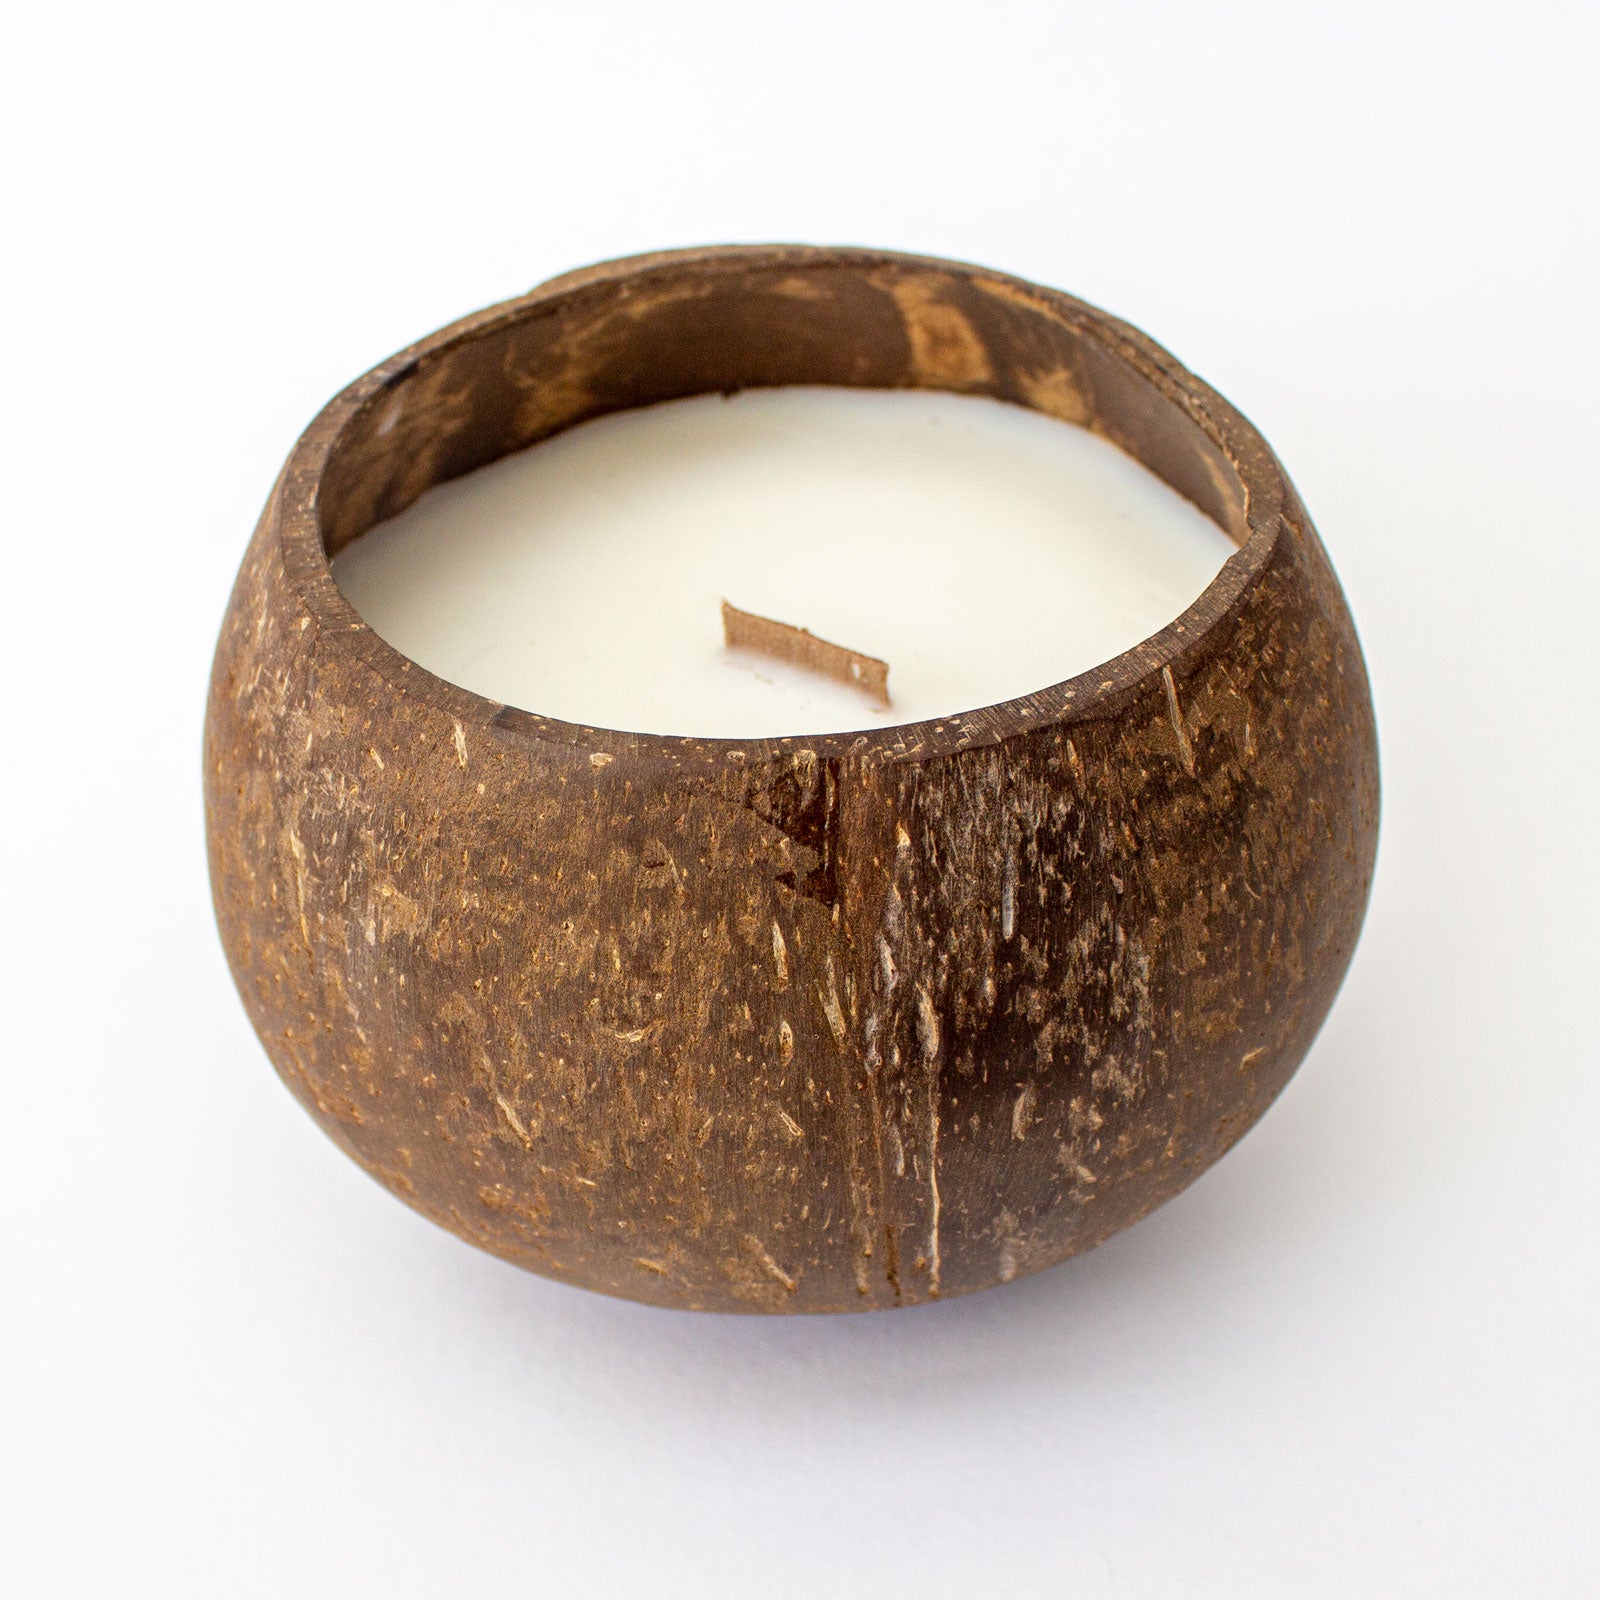 No.1 GIRLFRIEND - Toasted Coconut Bowl Candle – Soy Wax - Gift Present